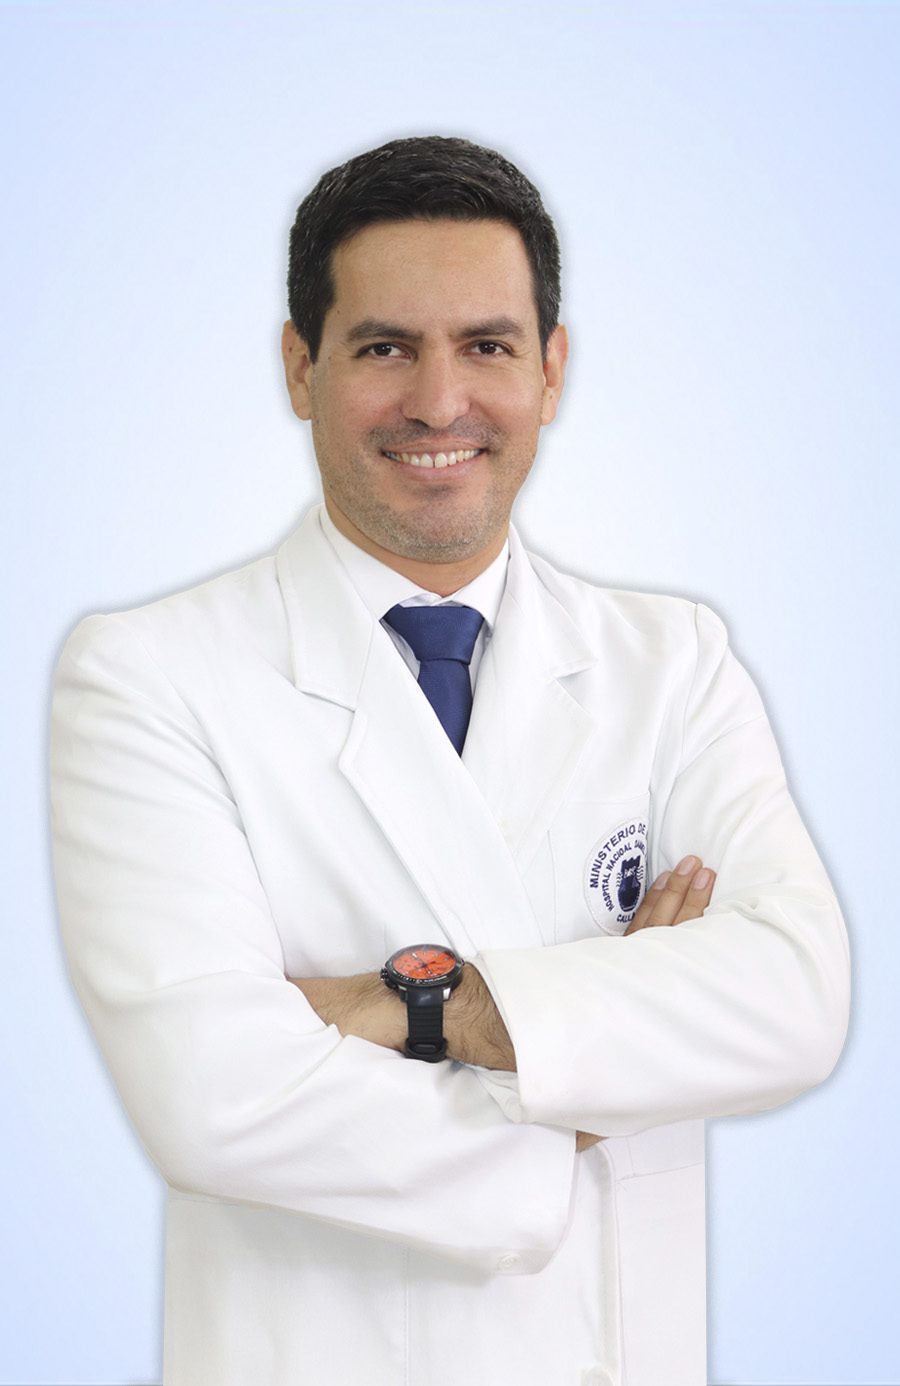 DR. CACERES